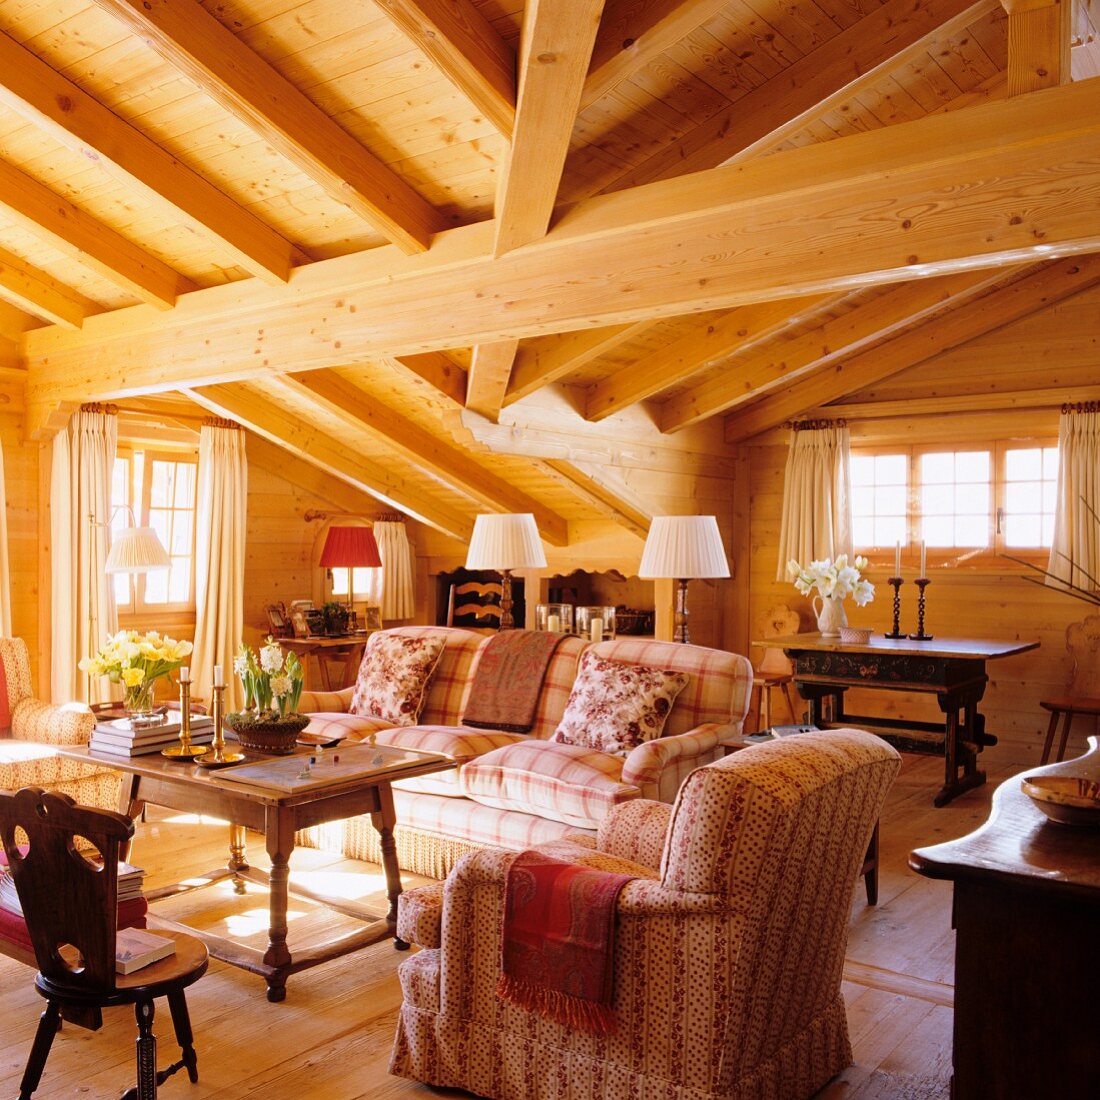 Elegant chalet living room with heavy roof-beam structure and antique furniture